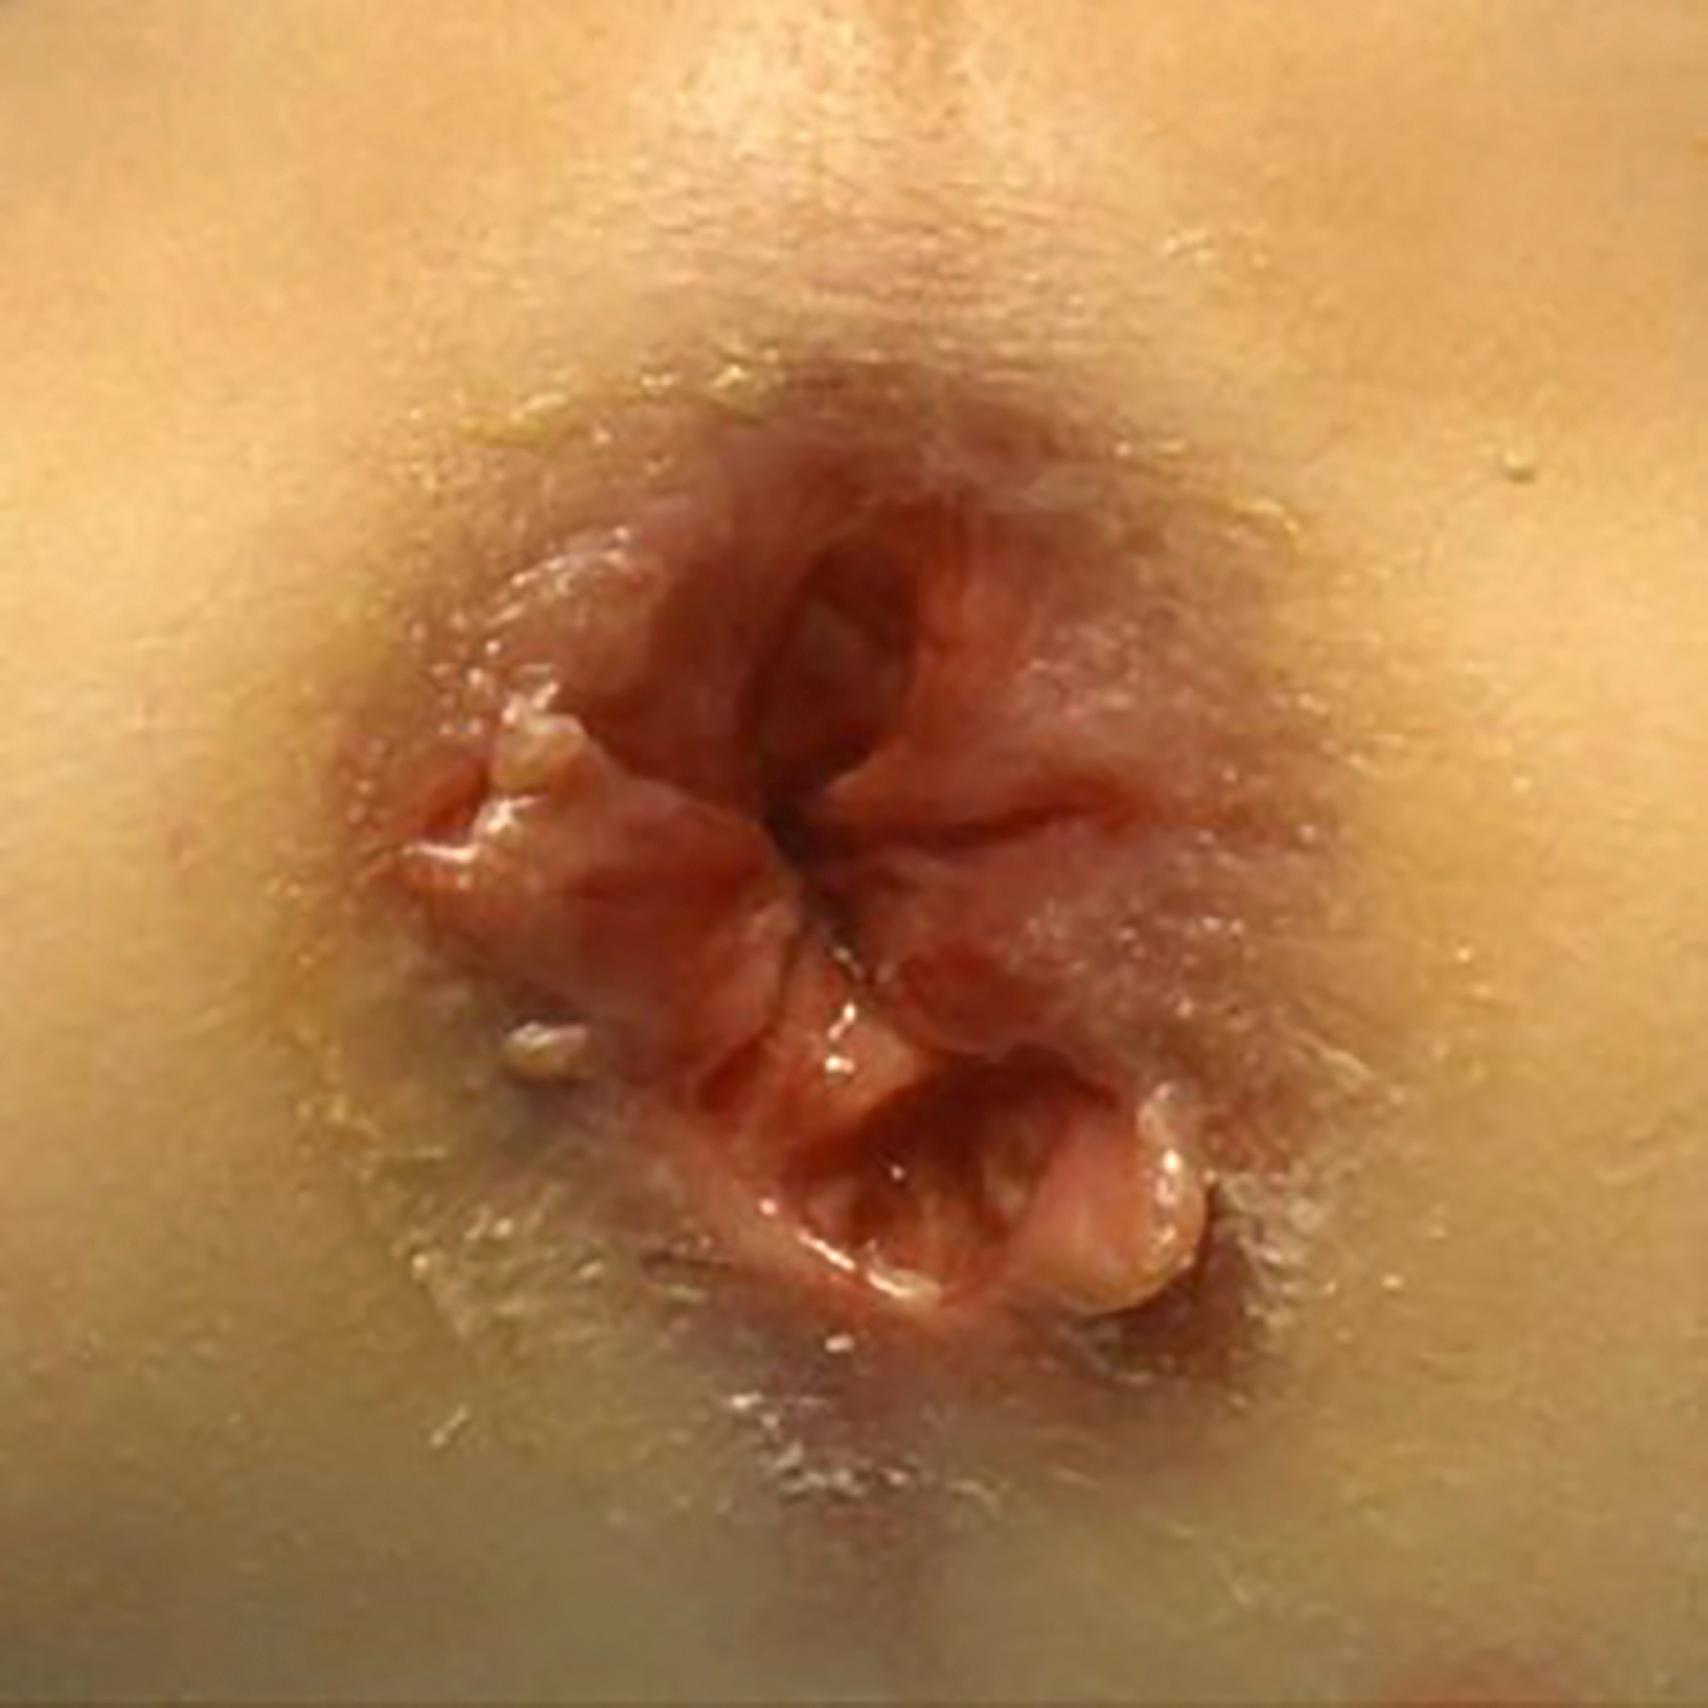 Fig. 46.3, Crohn disease associated anal fissures with undermining of the edges.